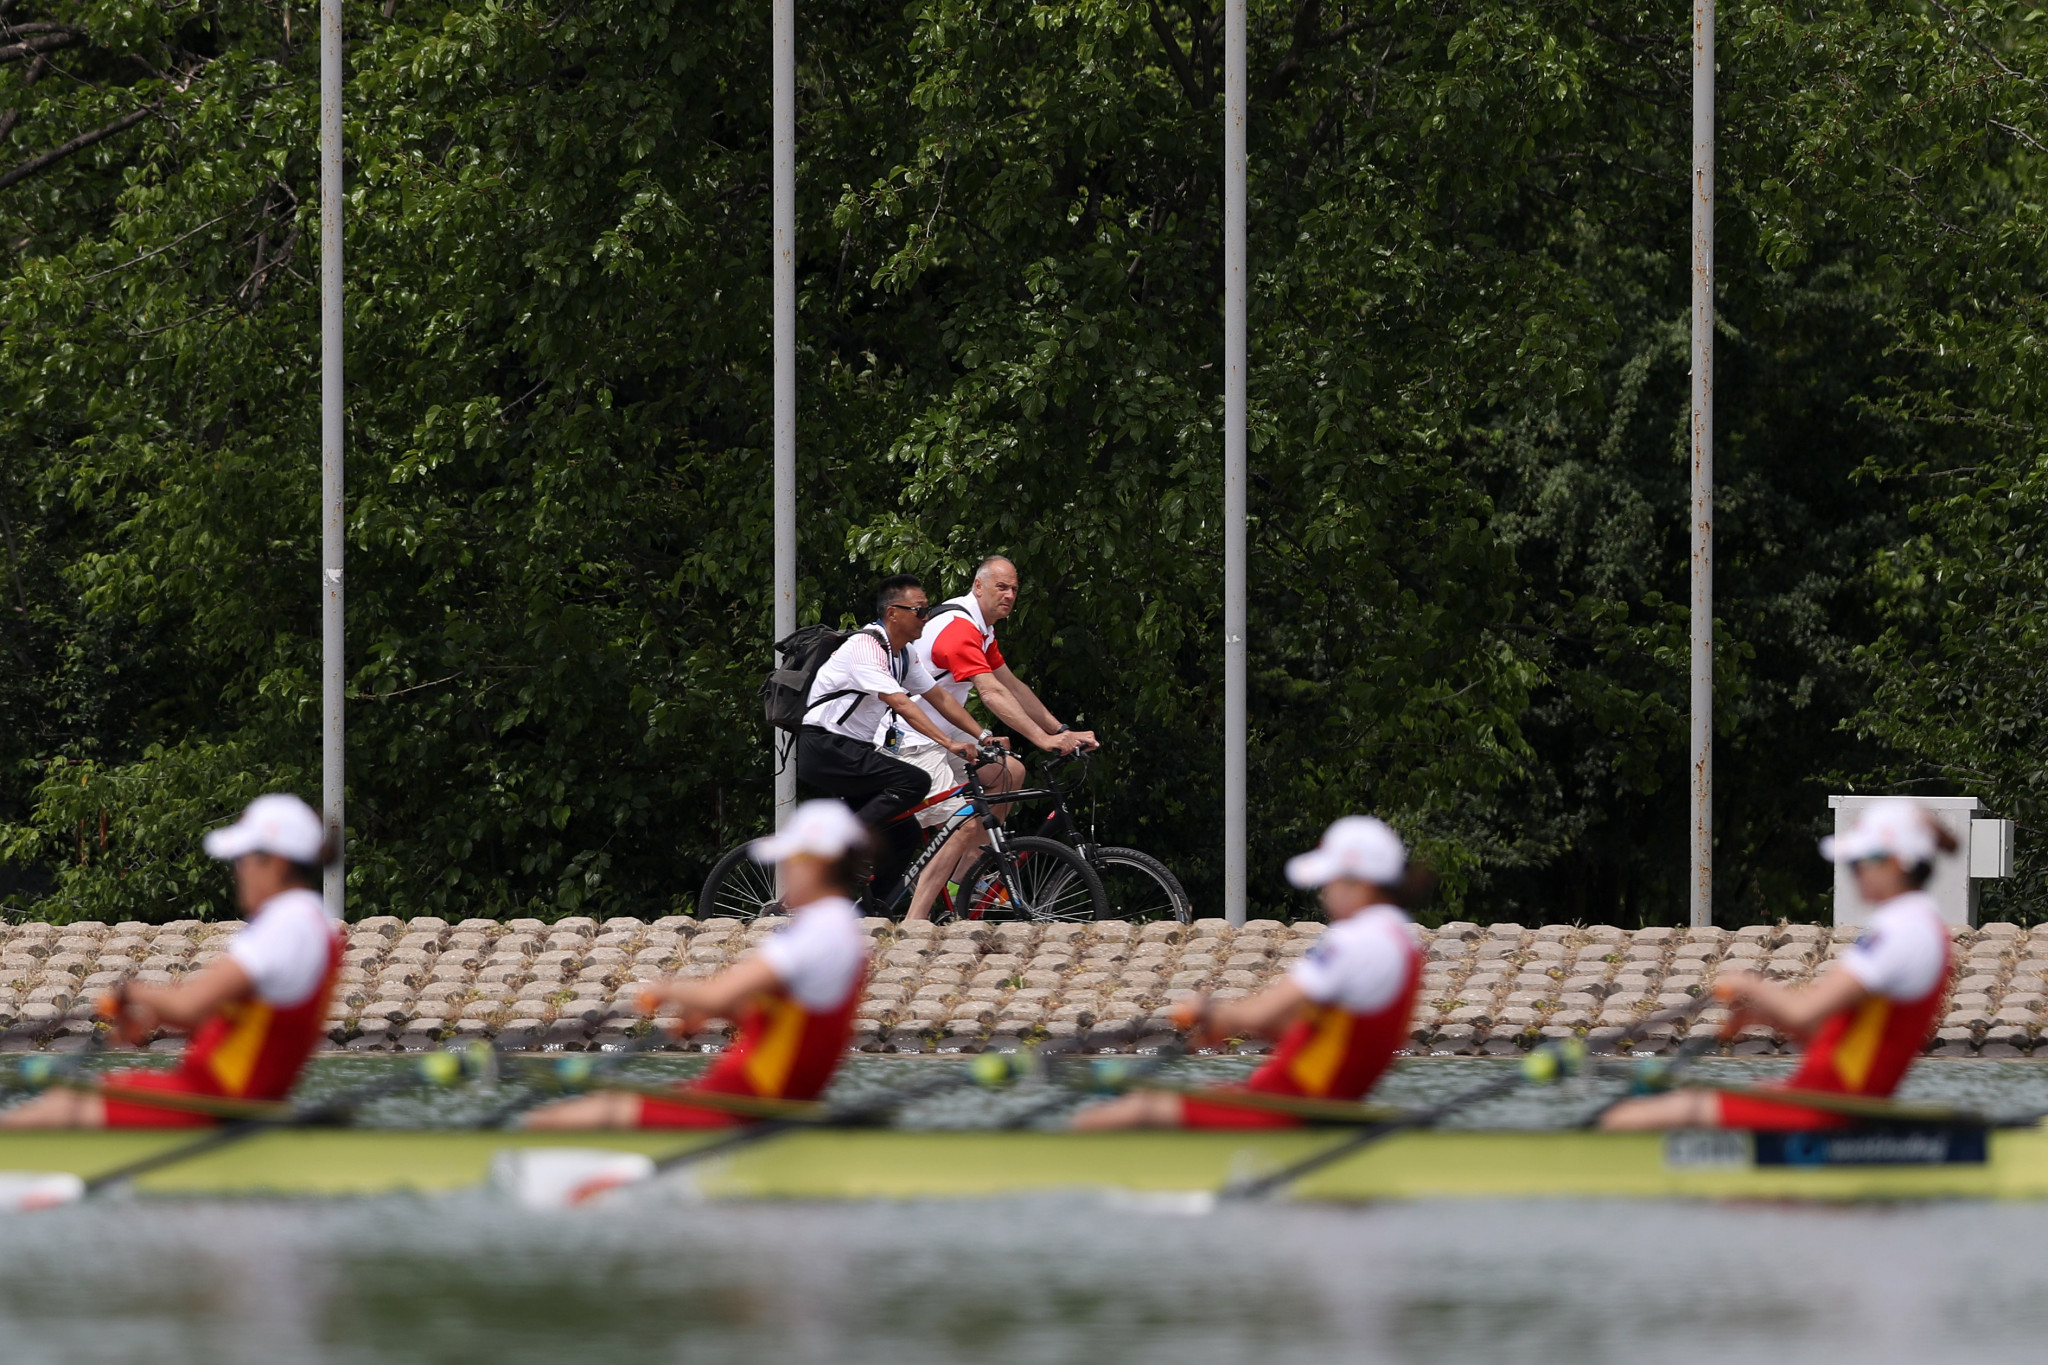 Olympic legend Redgrave targets one rowing gold medal for China at Tokyo 2020